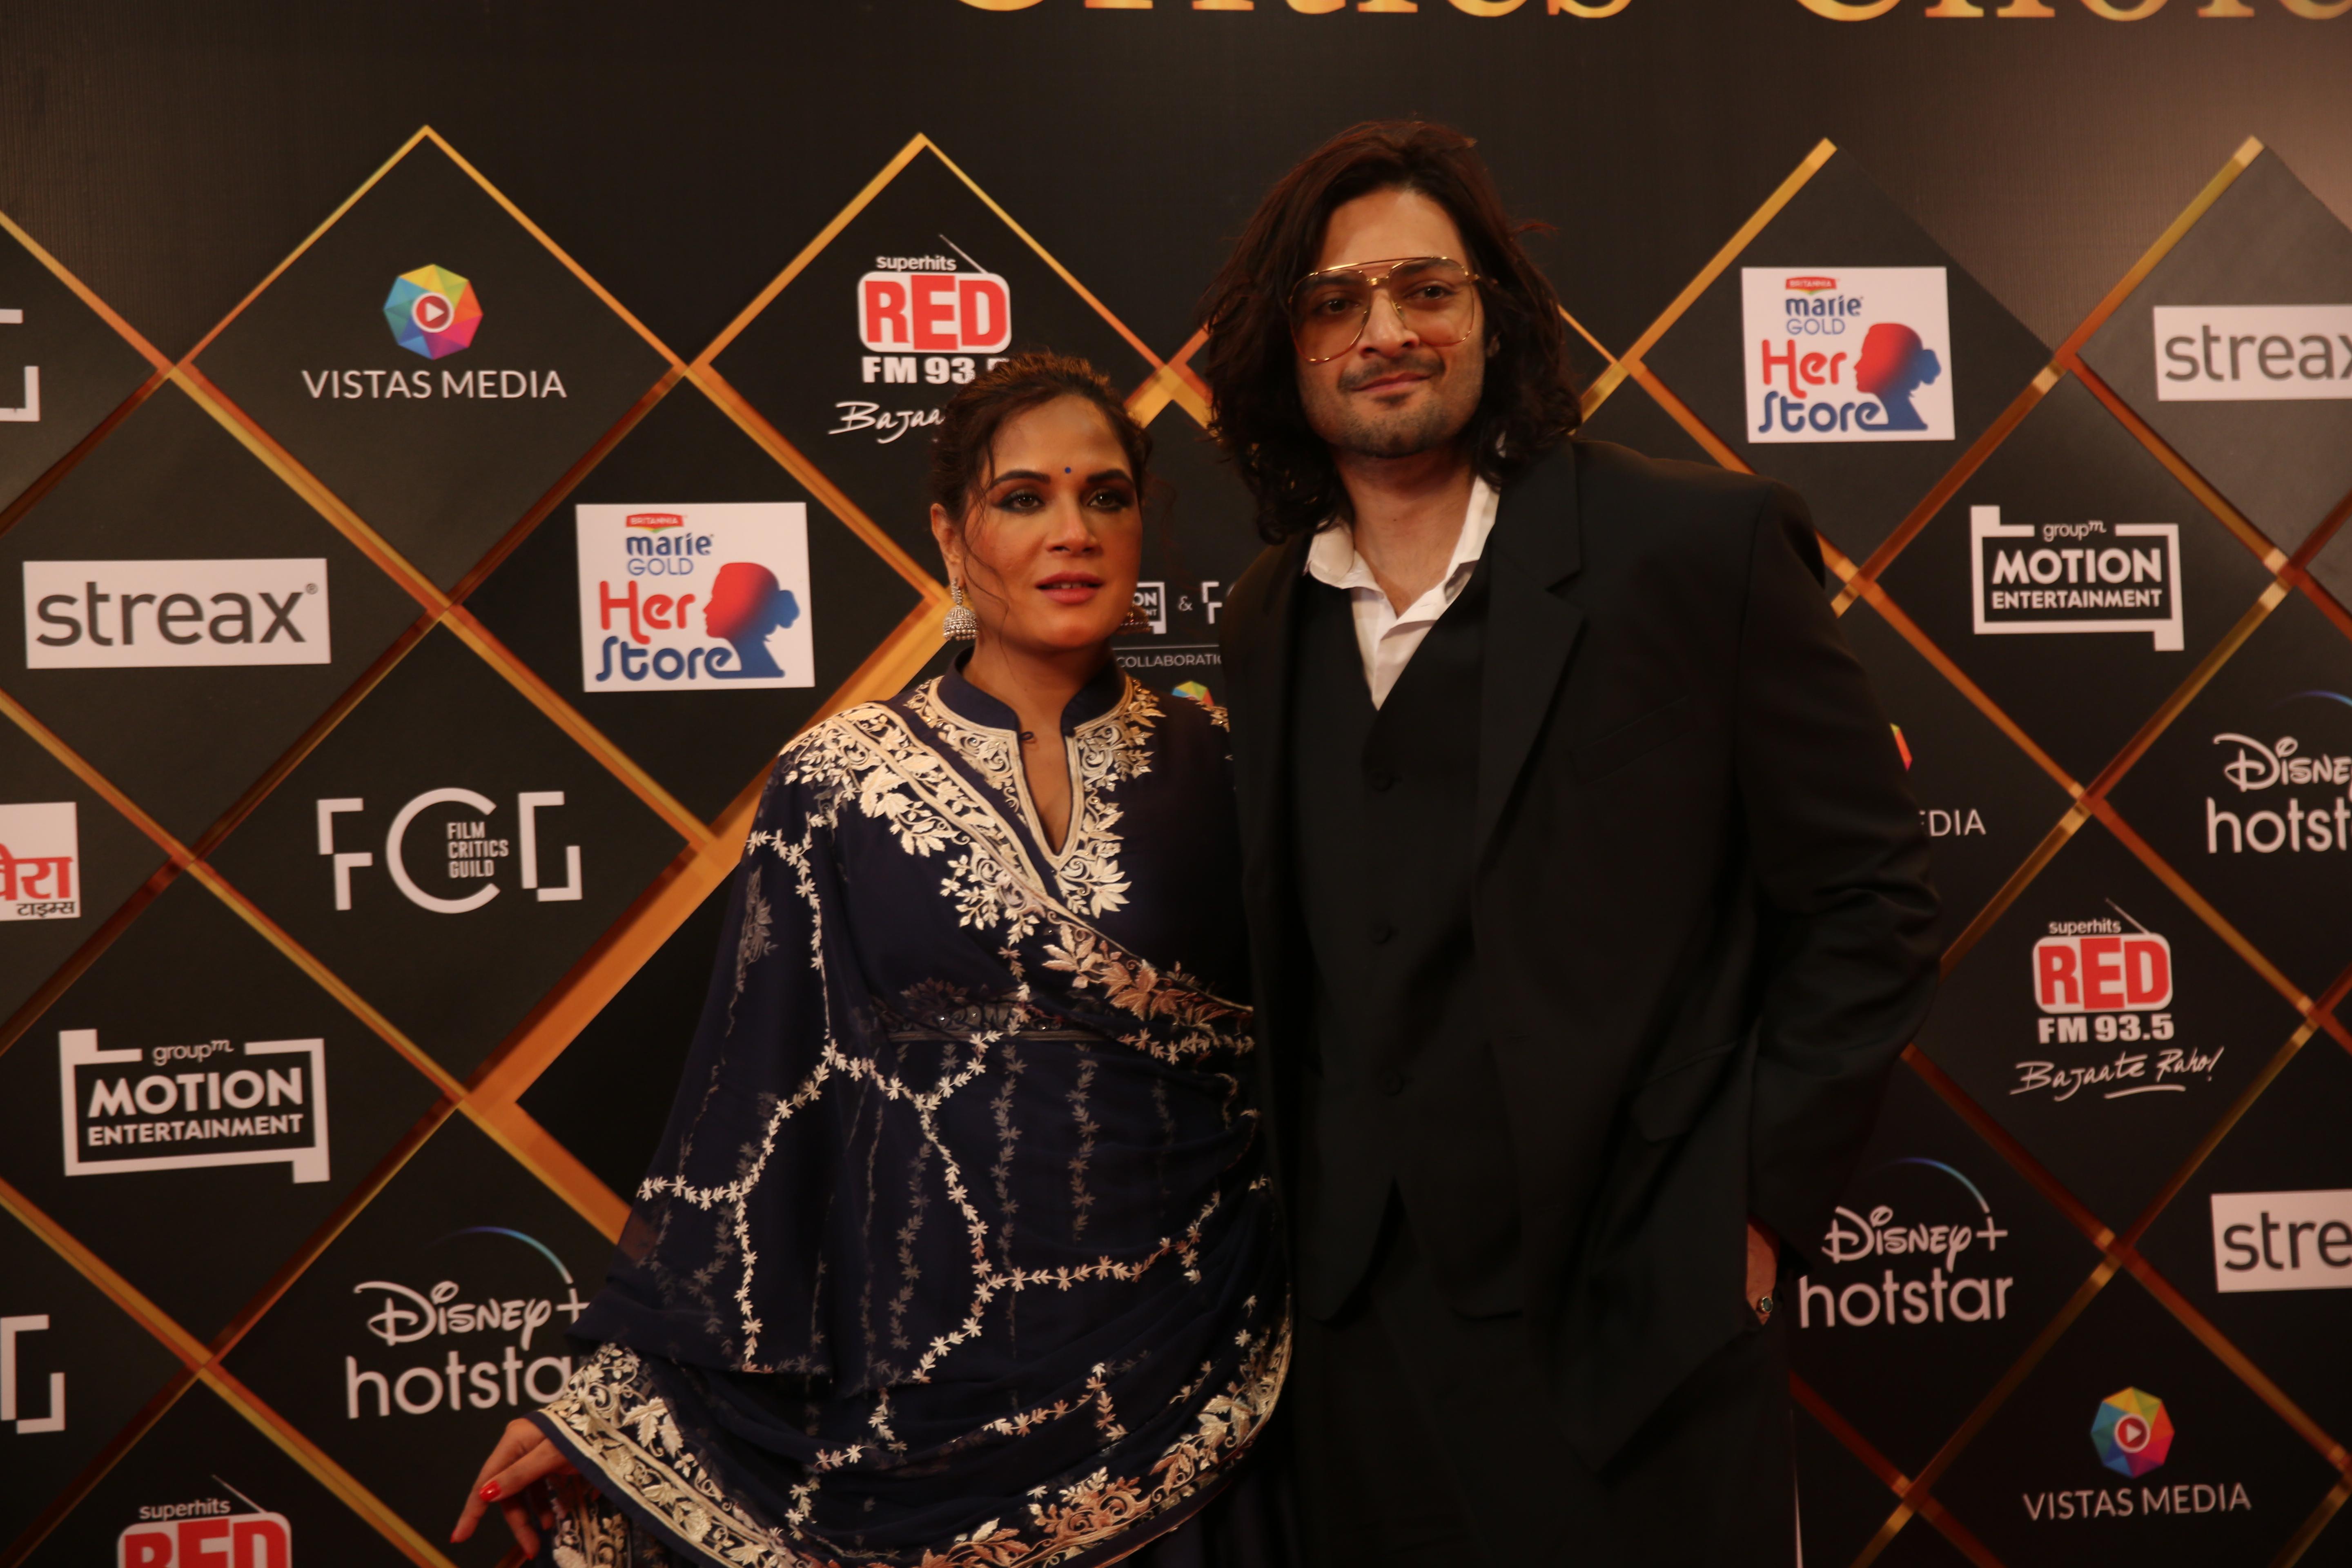 Parents-to-be Richa and Ali Fazal were glowing at the Critics Choice Awards red carpet